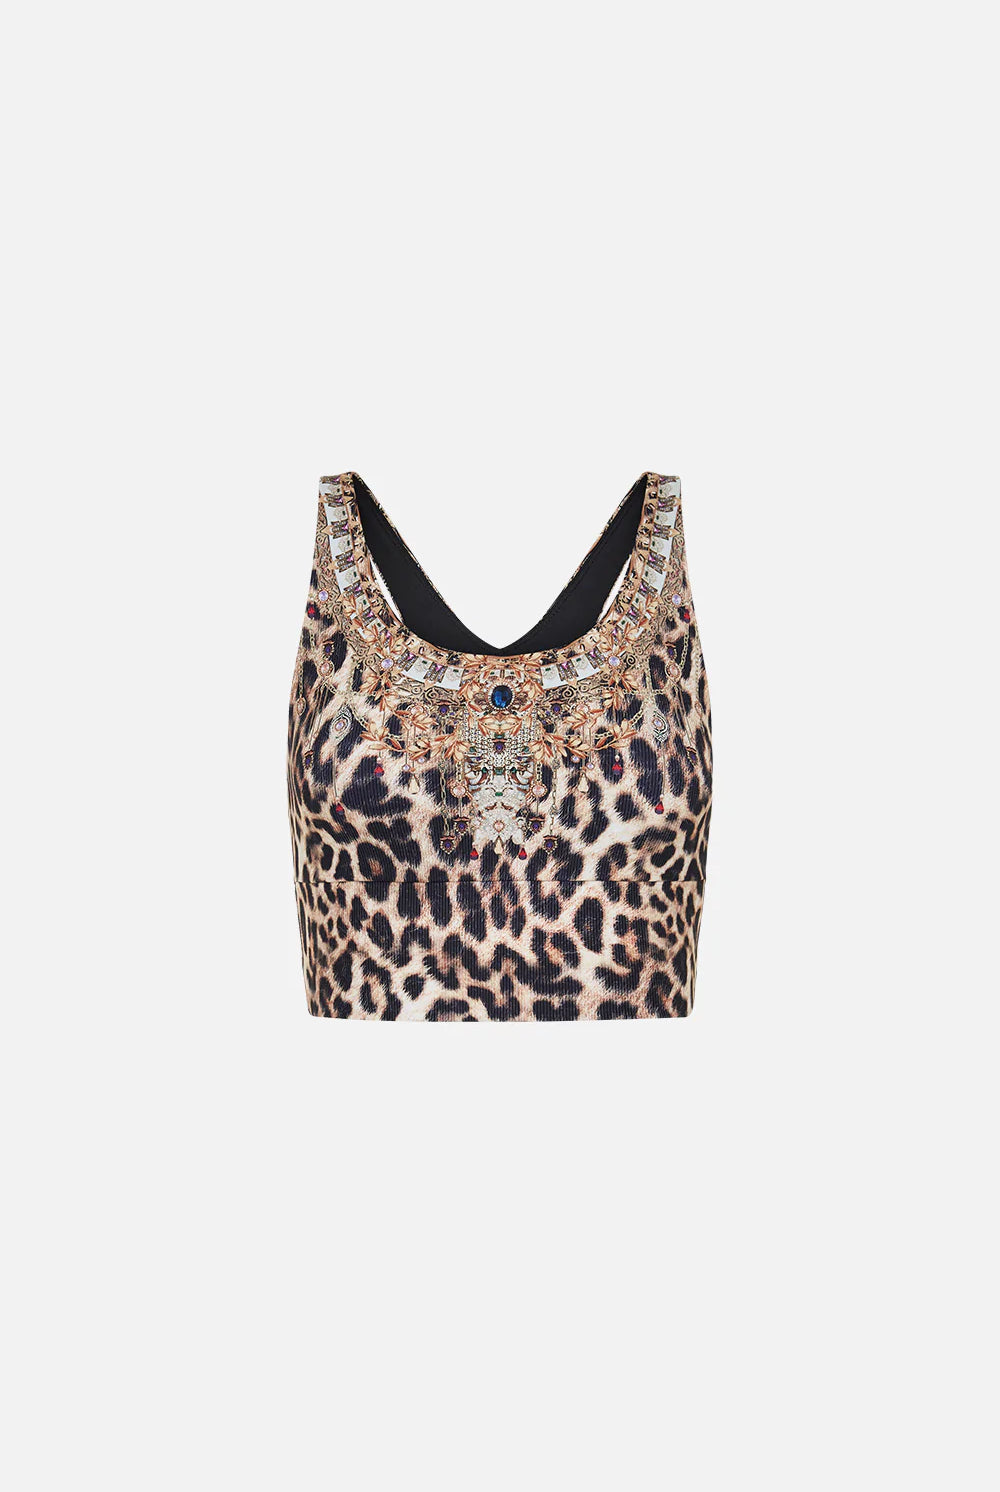 CAMILLA Banded Racer Back Crop - Nomadic Nymph - CAMILLA - [product type] - Magpie Style